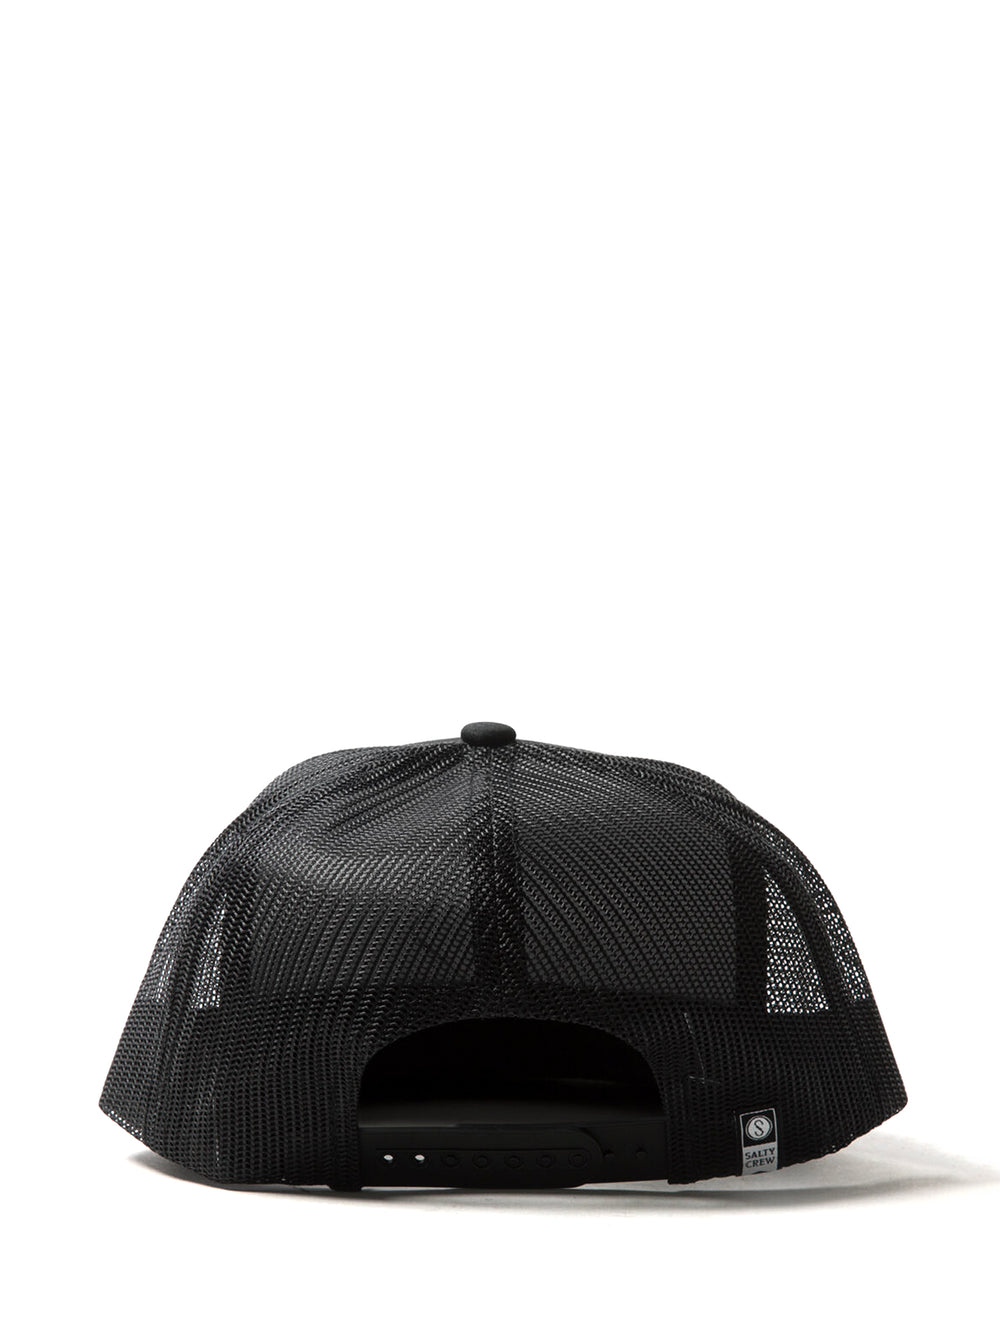 SALTY CREW TIPPET TRUCKER HAT - CLEARANCE